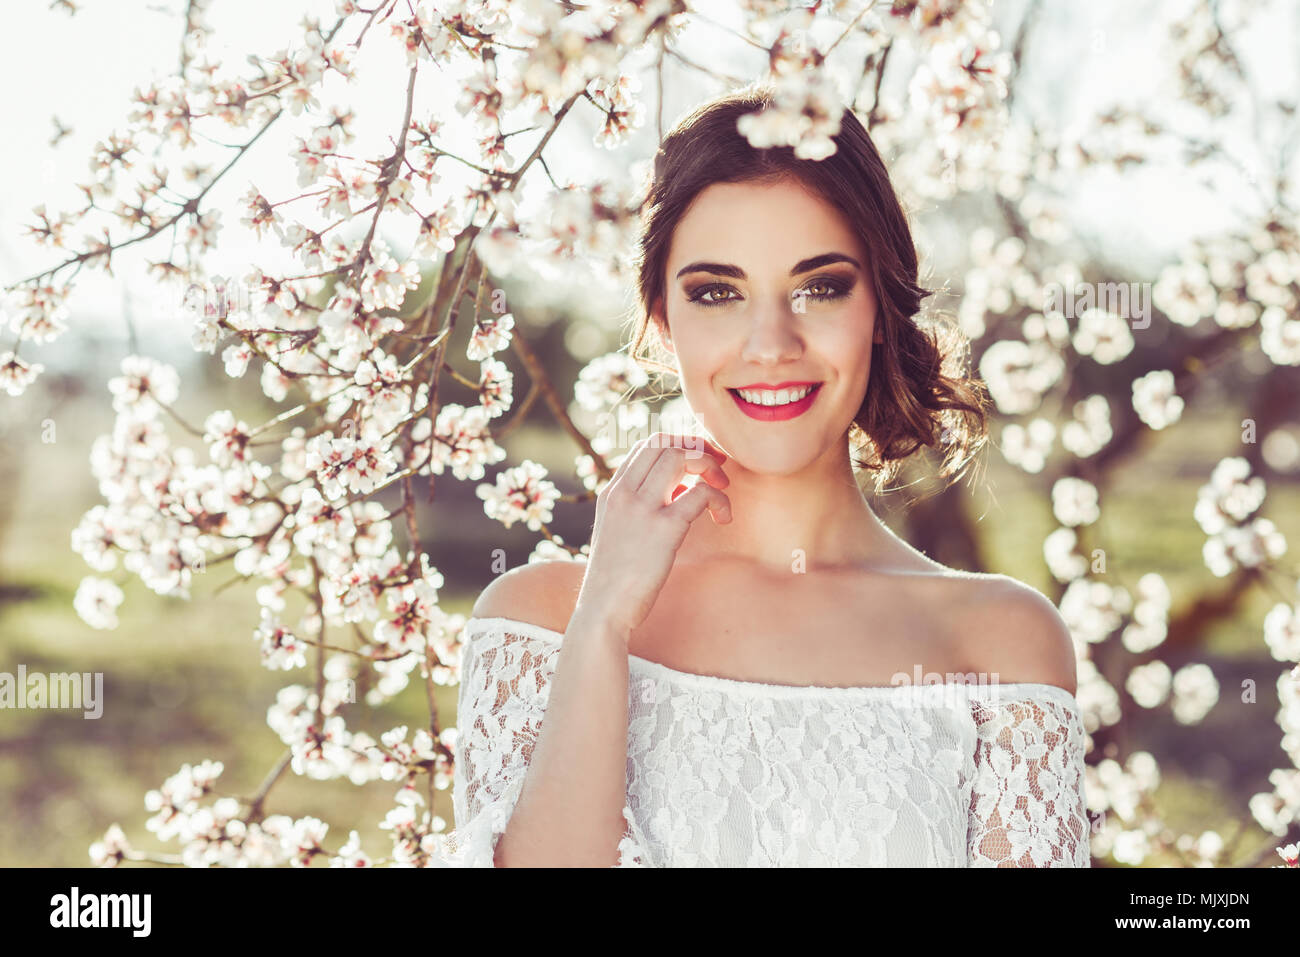 Portrait of young woman smiling in the flowered garden in the spring time. Almond flowers blossoms. Girl dressed in white like a bride. Stock Photo